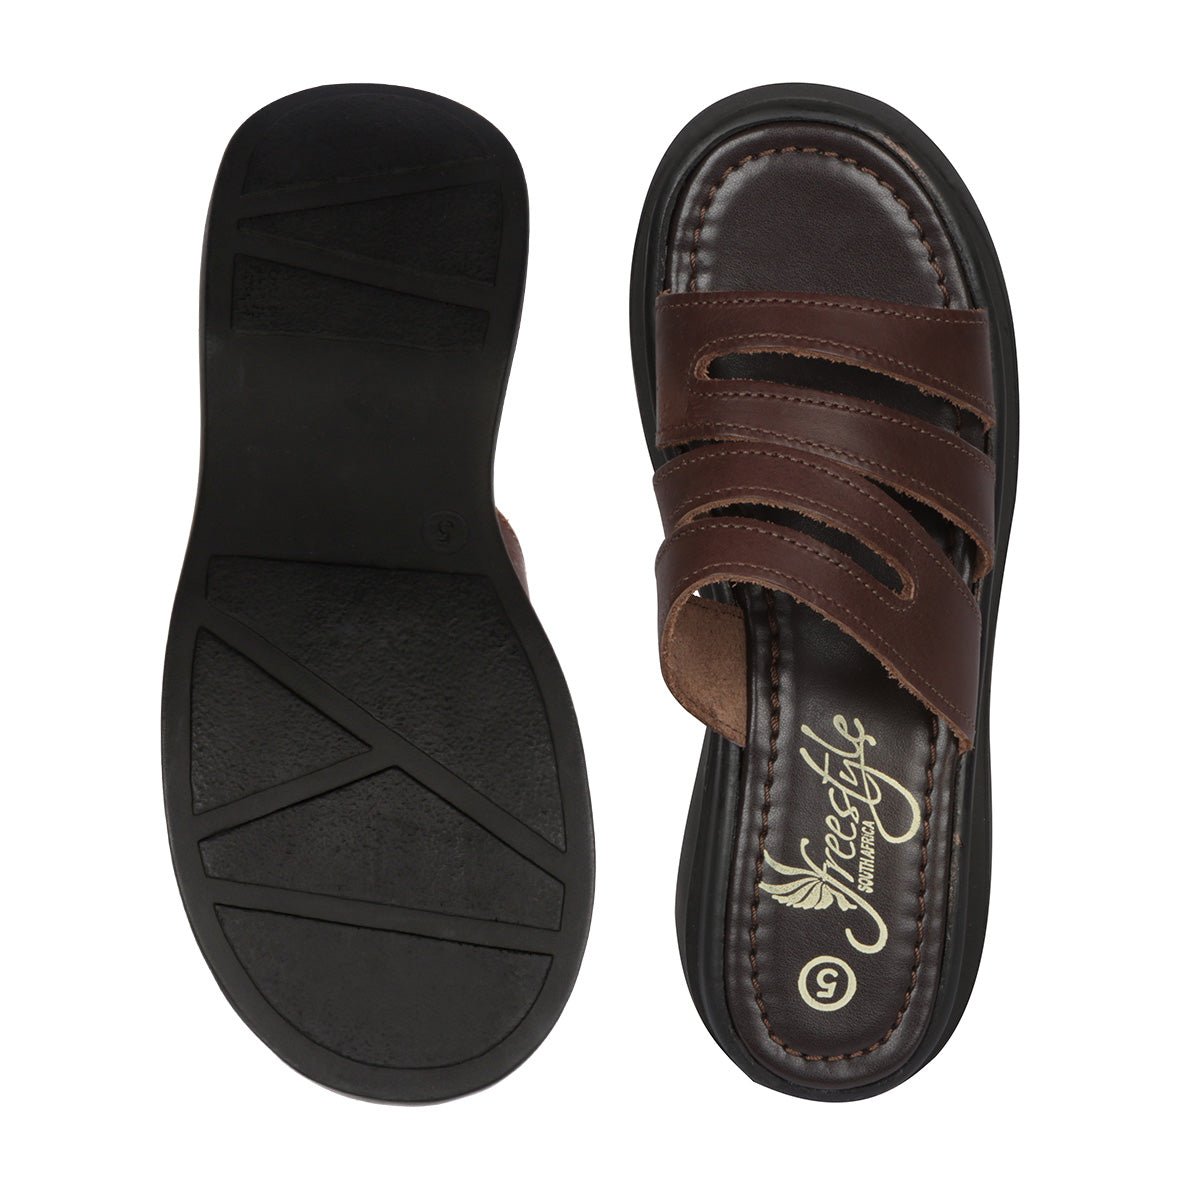 Freestyle Daisy Platform Leather Summer Sandal. - Freestyle SA Proudly local leather boots veldskoens vellies leather shoes suede veldskoens